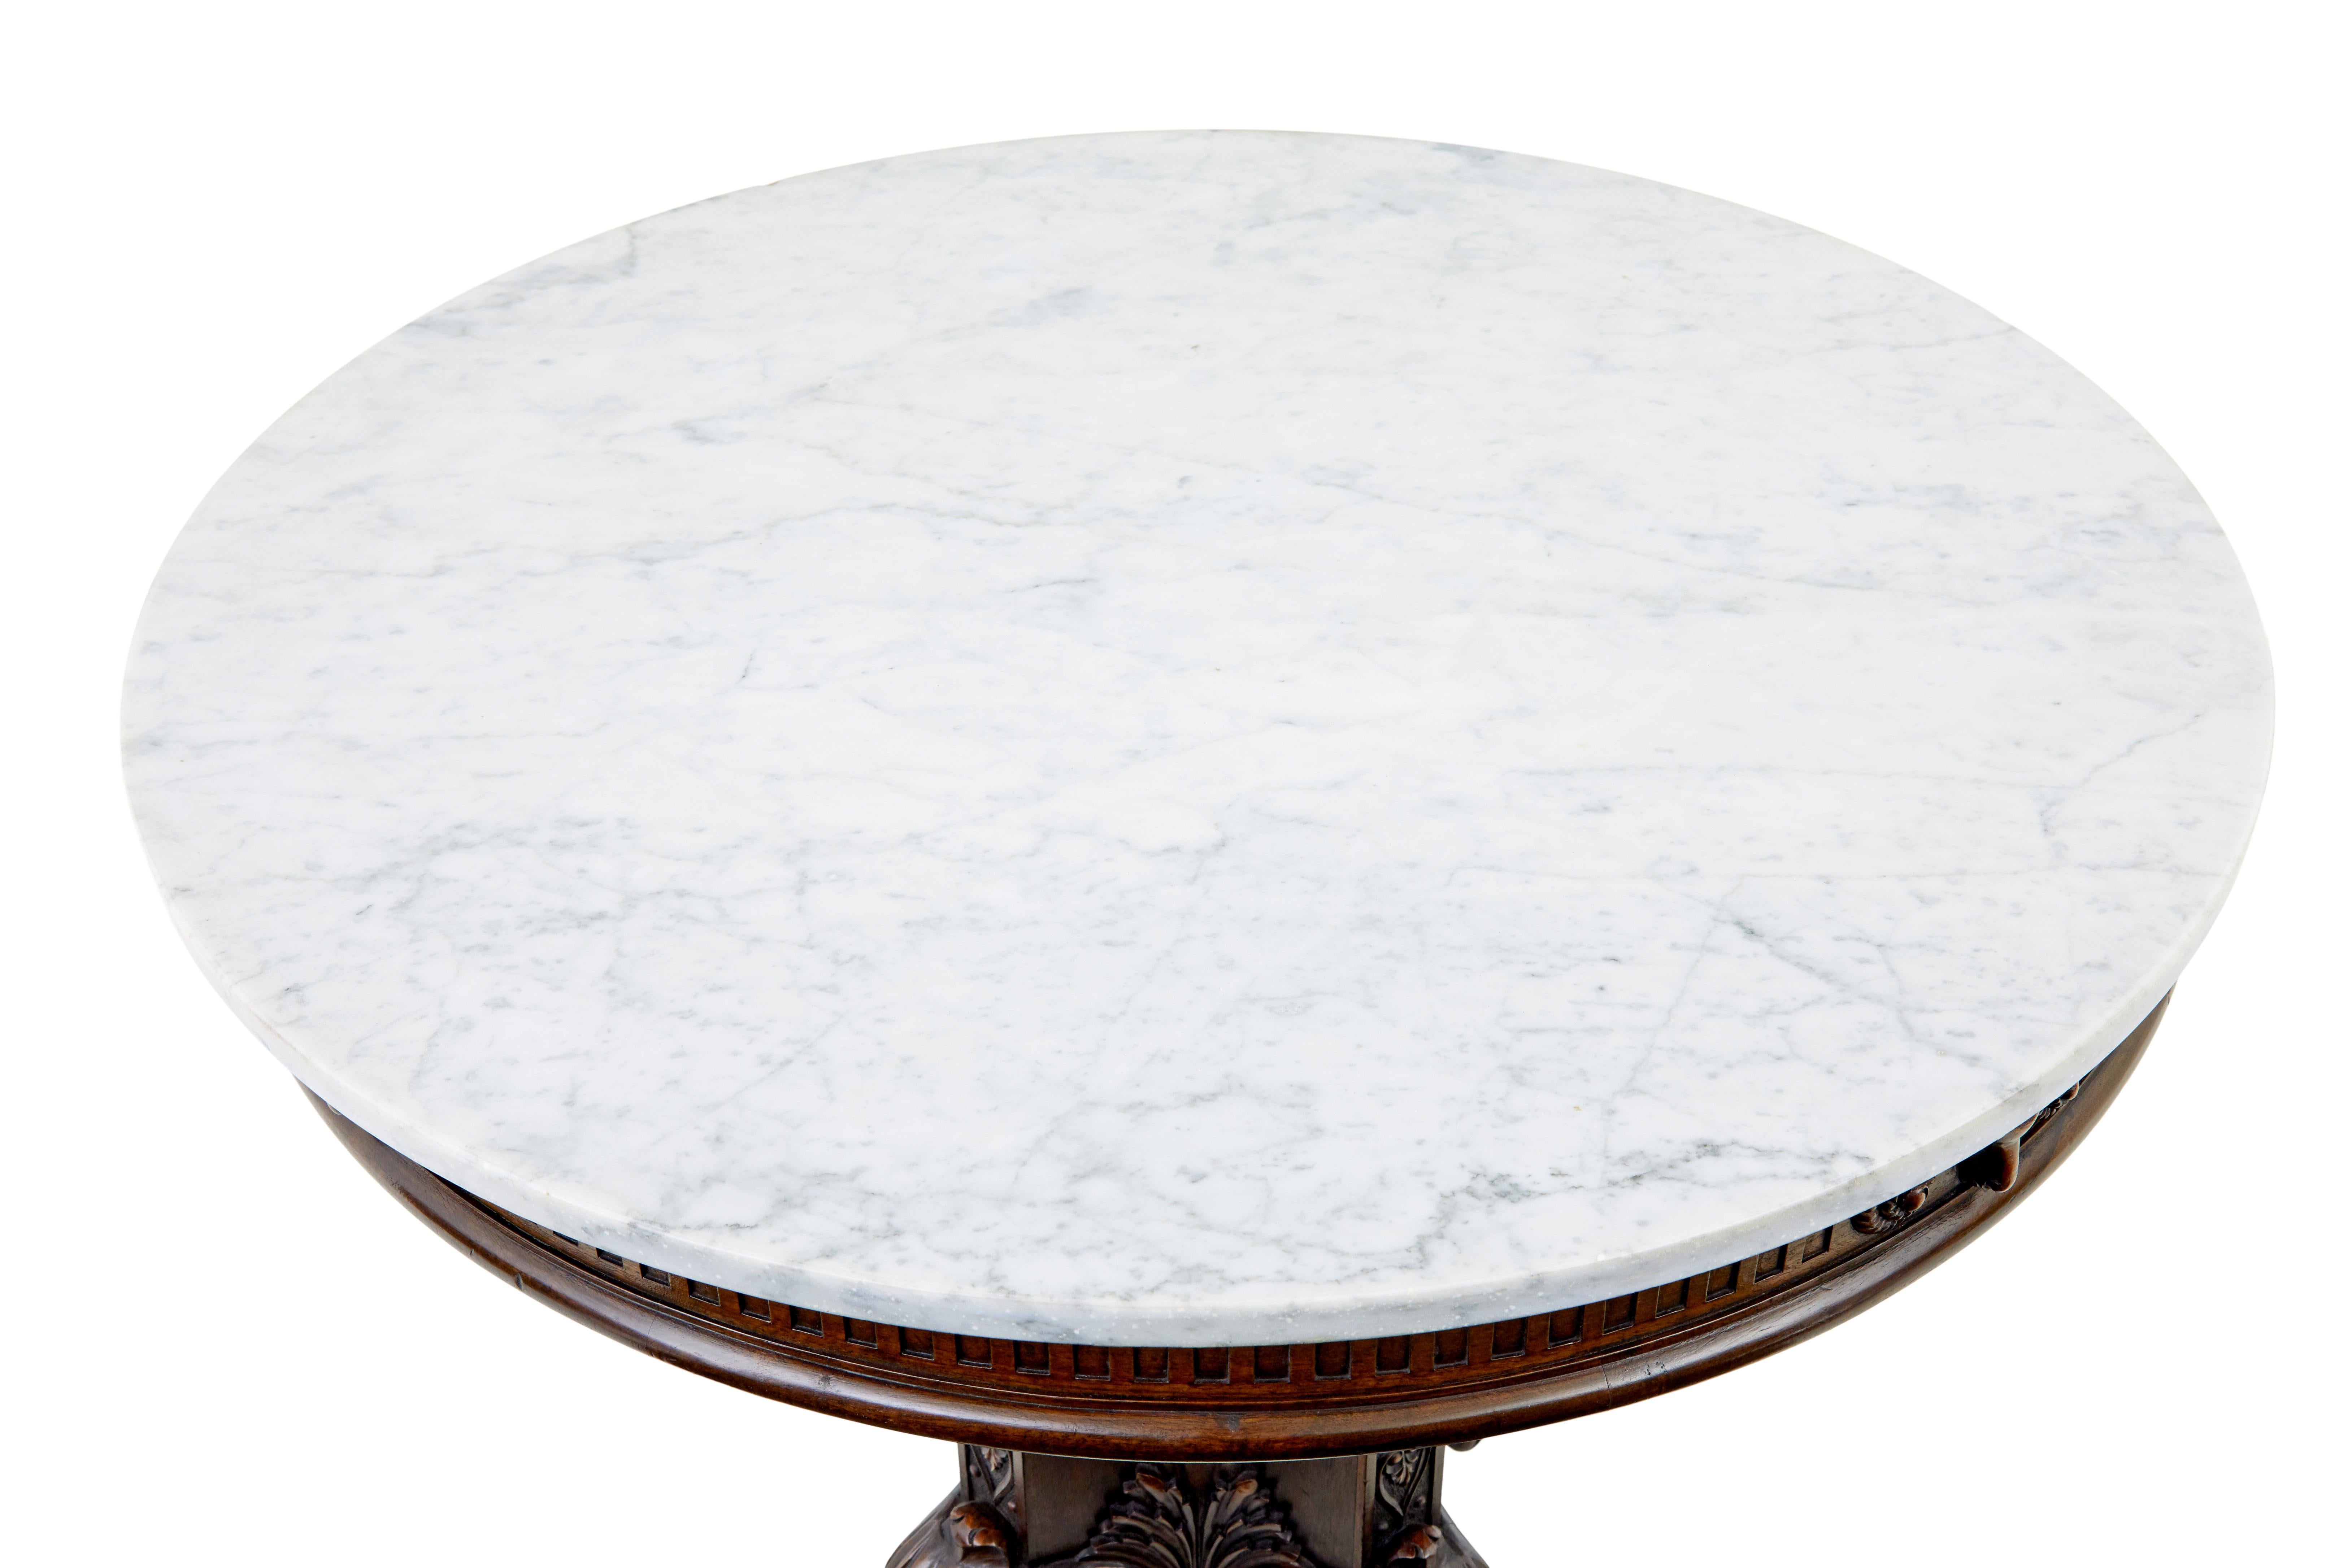 19th century carved oak and marble center table circa 1880.

Fine quality circular marble top center table.  White marble with grey veining and rounded edge, sits on a frieze of carved rams heads, fluting and a moulded edge.  Supported by a 4 sided